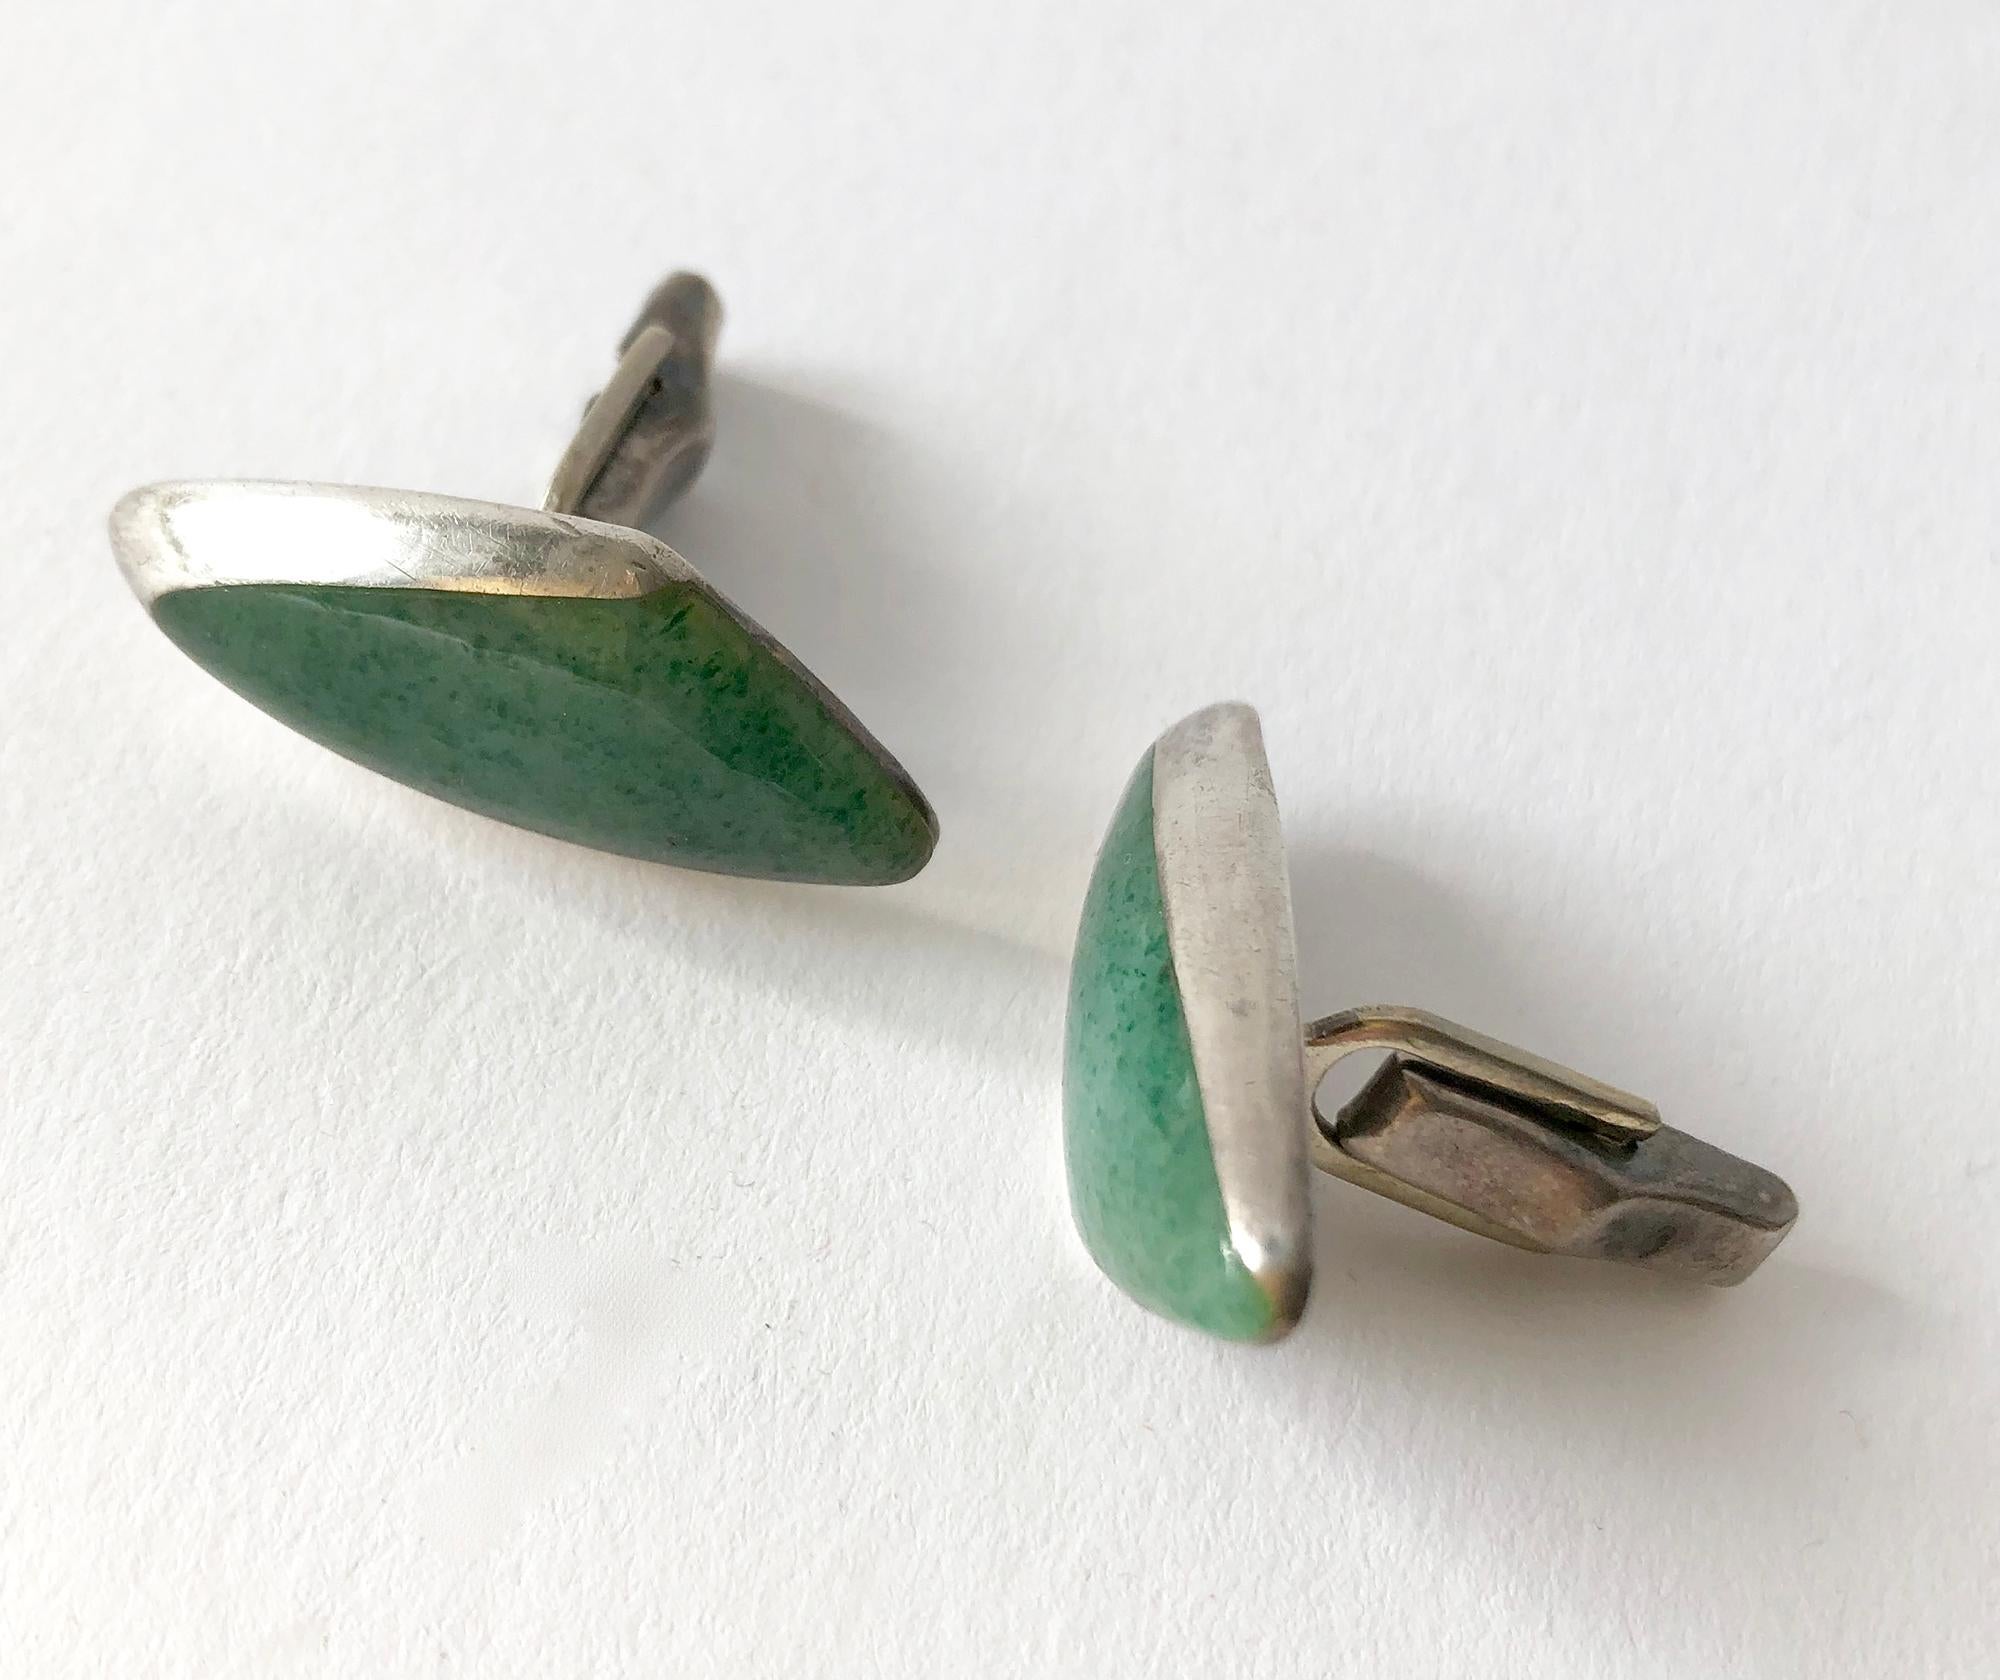 Sterling silver with aventurine triangular stones created by Enrique Ledesma of Taxco, Mexico.  Cufflinks measure 1/2